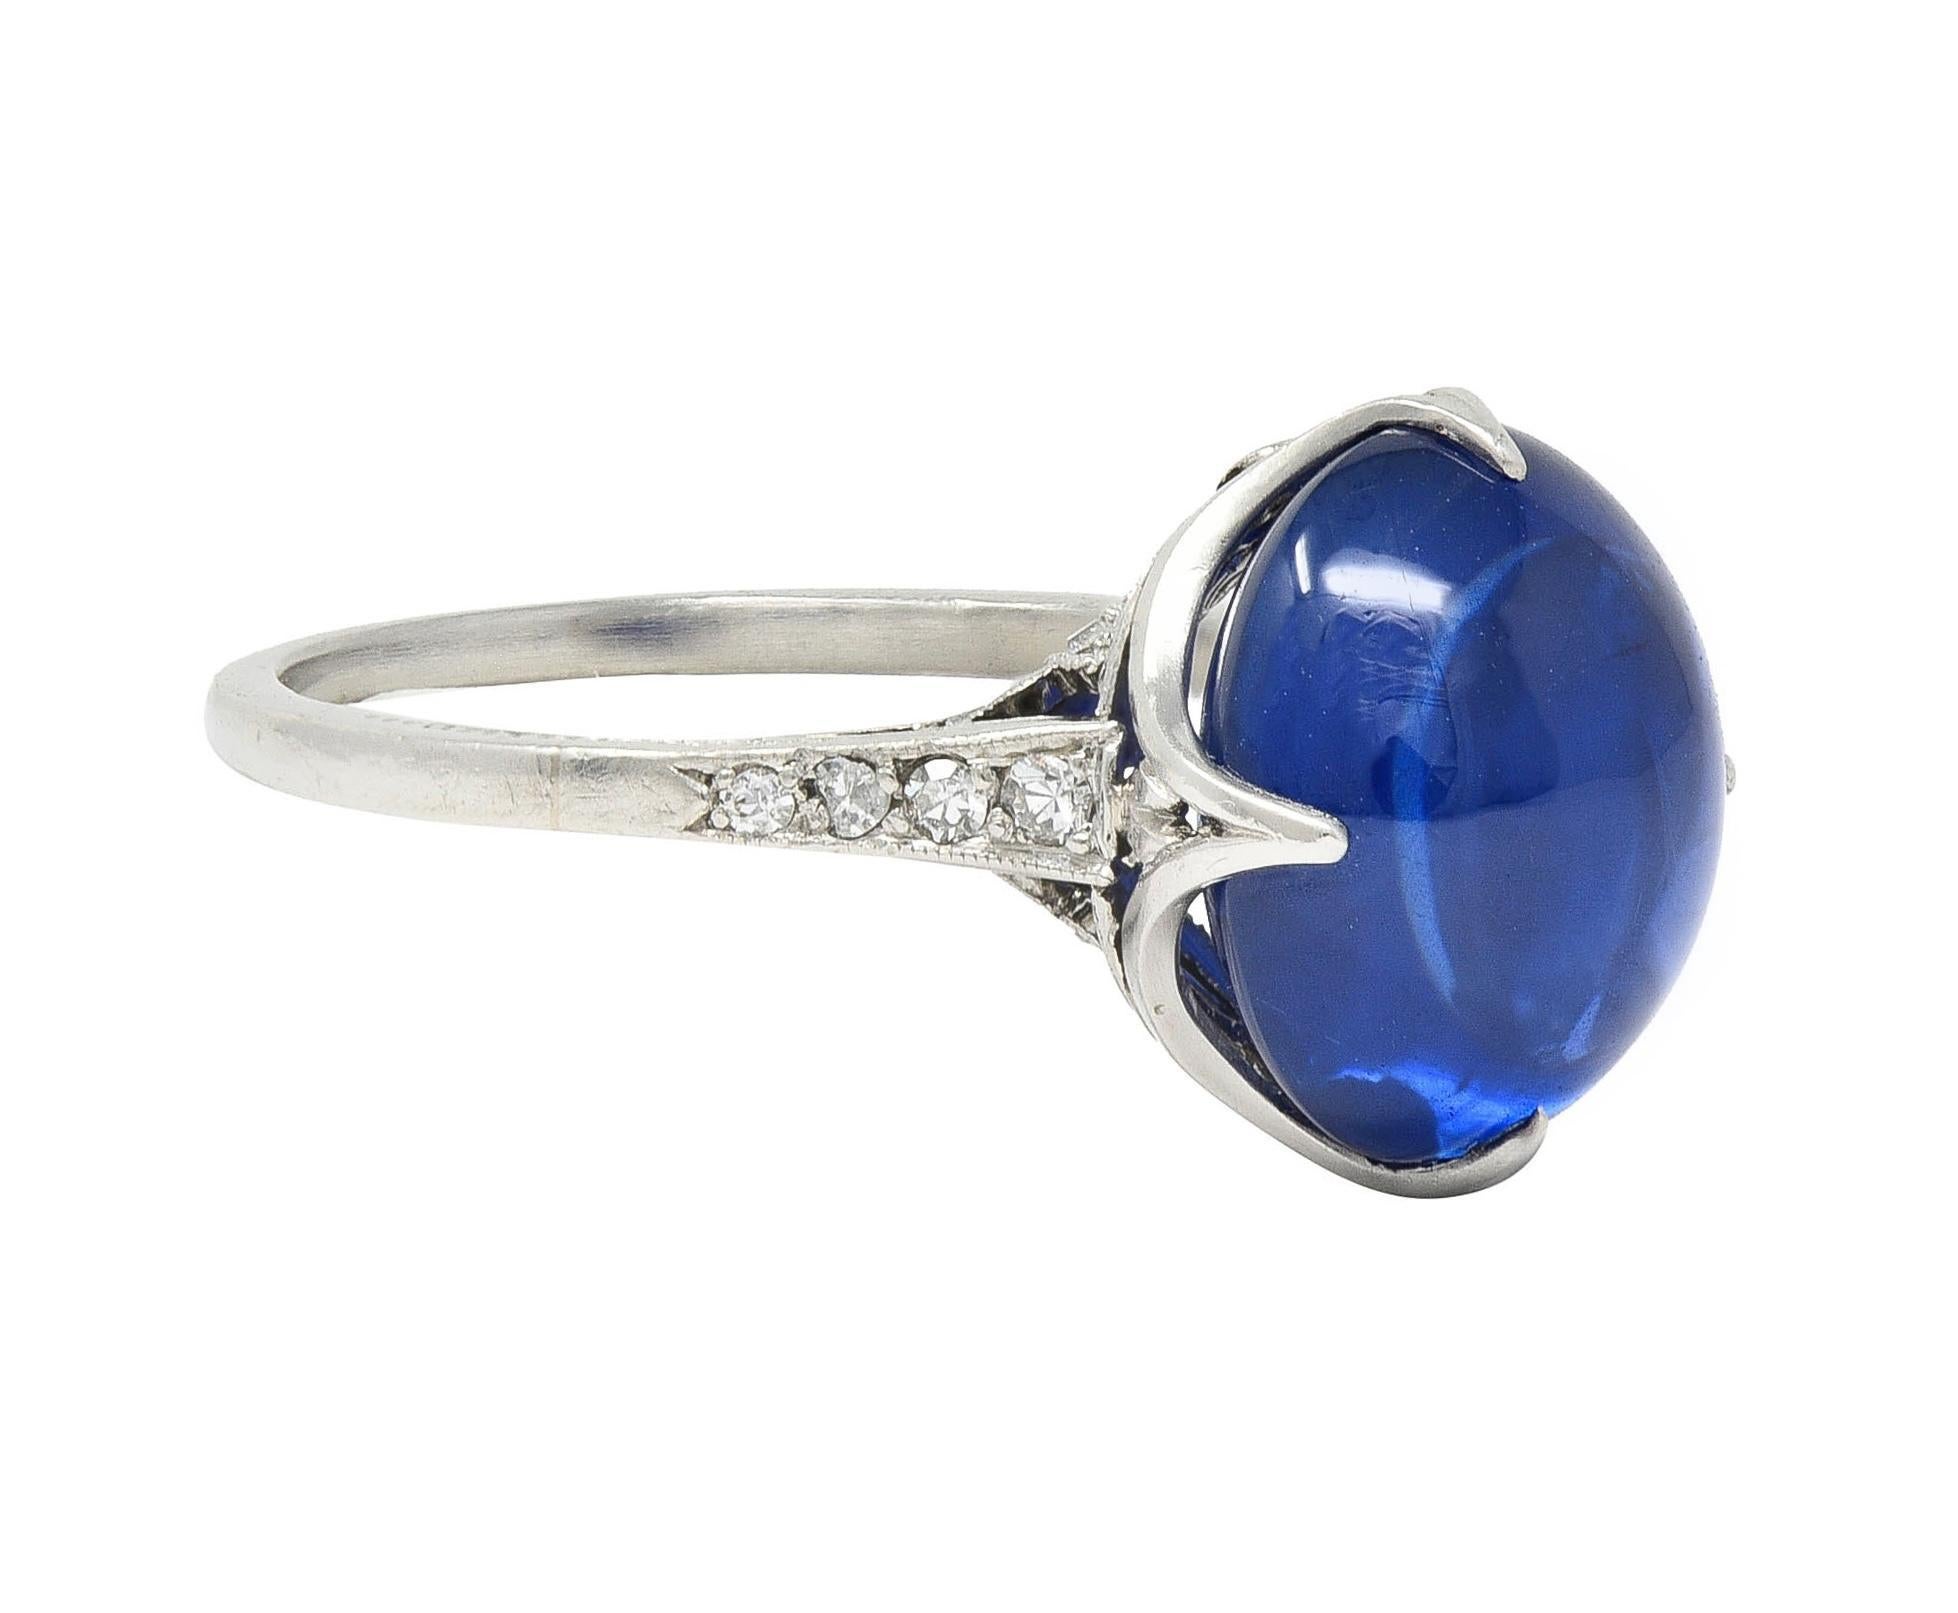 Centering an oval-shaped sapphire double cabochon weighing approximately 7.19 carats
Transparent vibrant medium blue in color - set with talon prongs in pierced gallery
Depicting tied ribbon with flaring tails in profile - flanked by cathedral